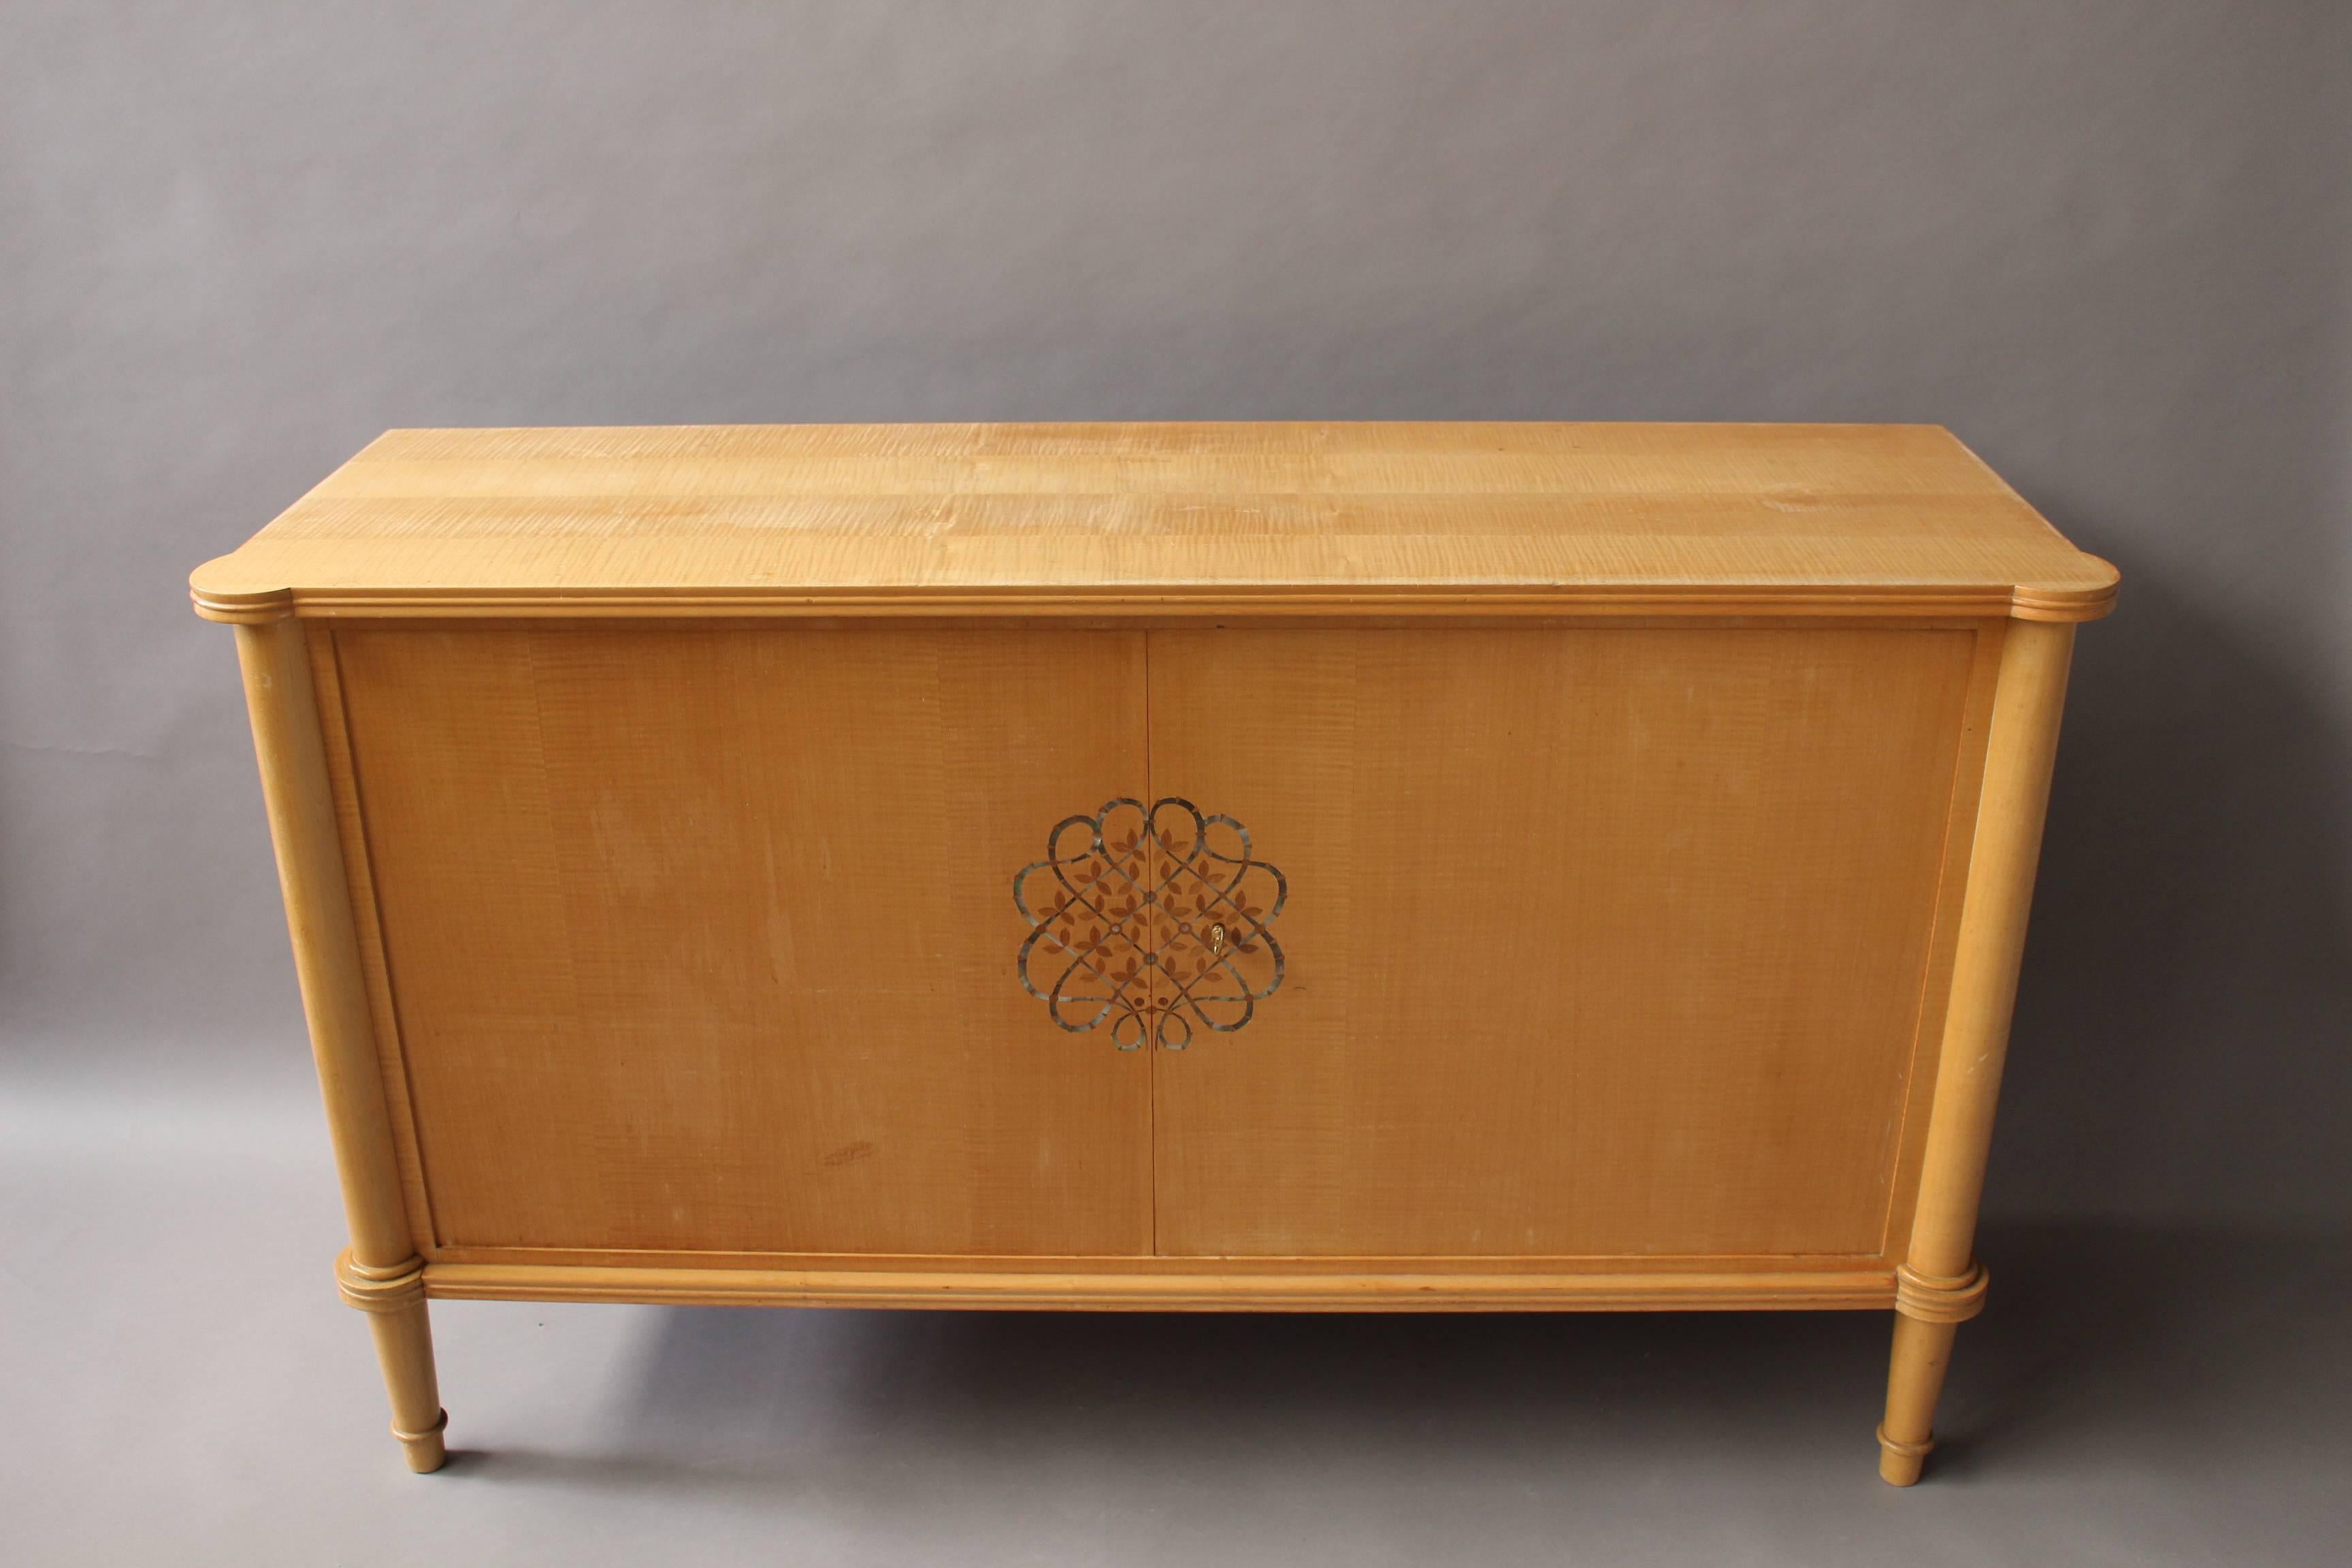 Fine French Art Deco sycamore and marquetry buffet / commode by Leleu.
Signed and documented page 55 of the book: Leleu, decorateurs ensembliers by Francoise Siriex. Editions Monelle Hayot.